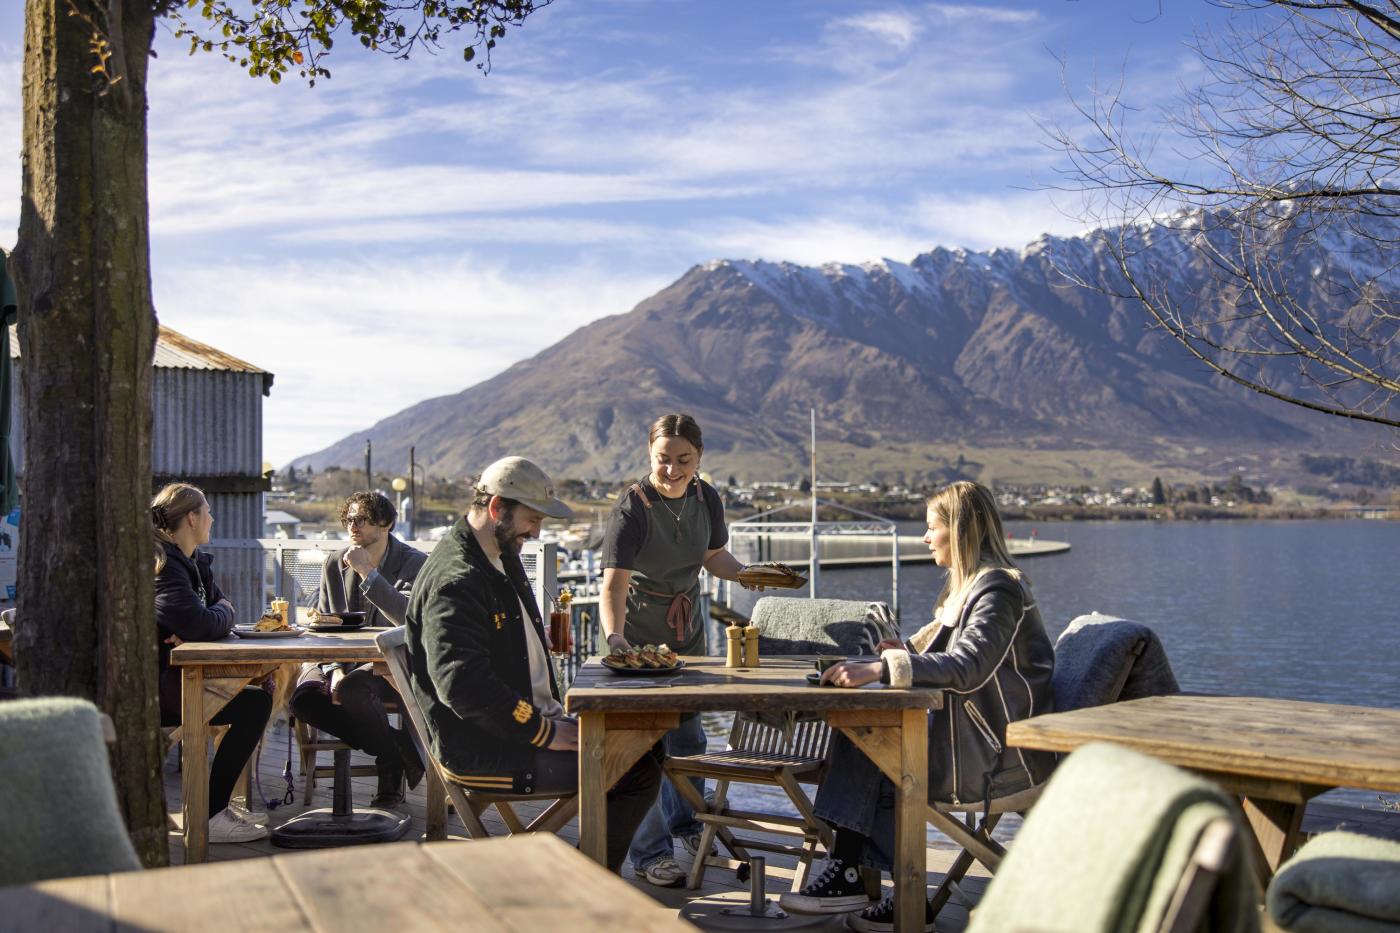 People dining outside next to the lake with the Remarkables mountain range in the background at The Boat Shed